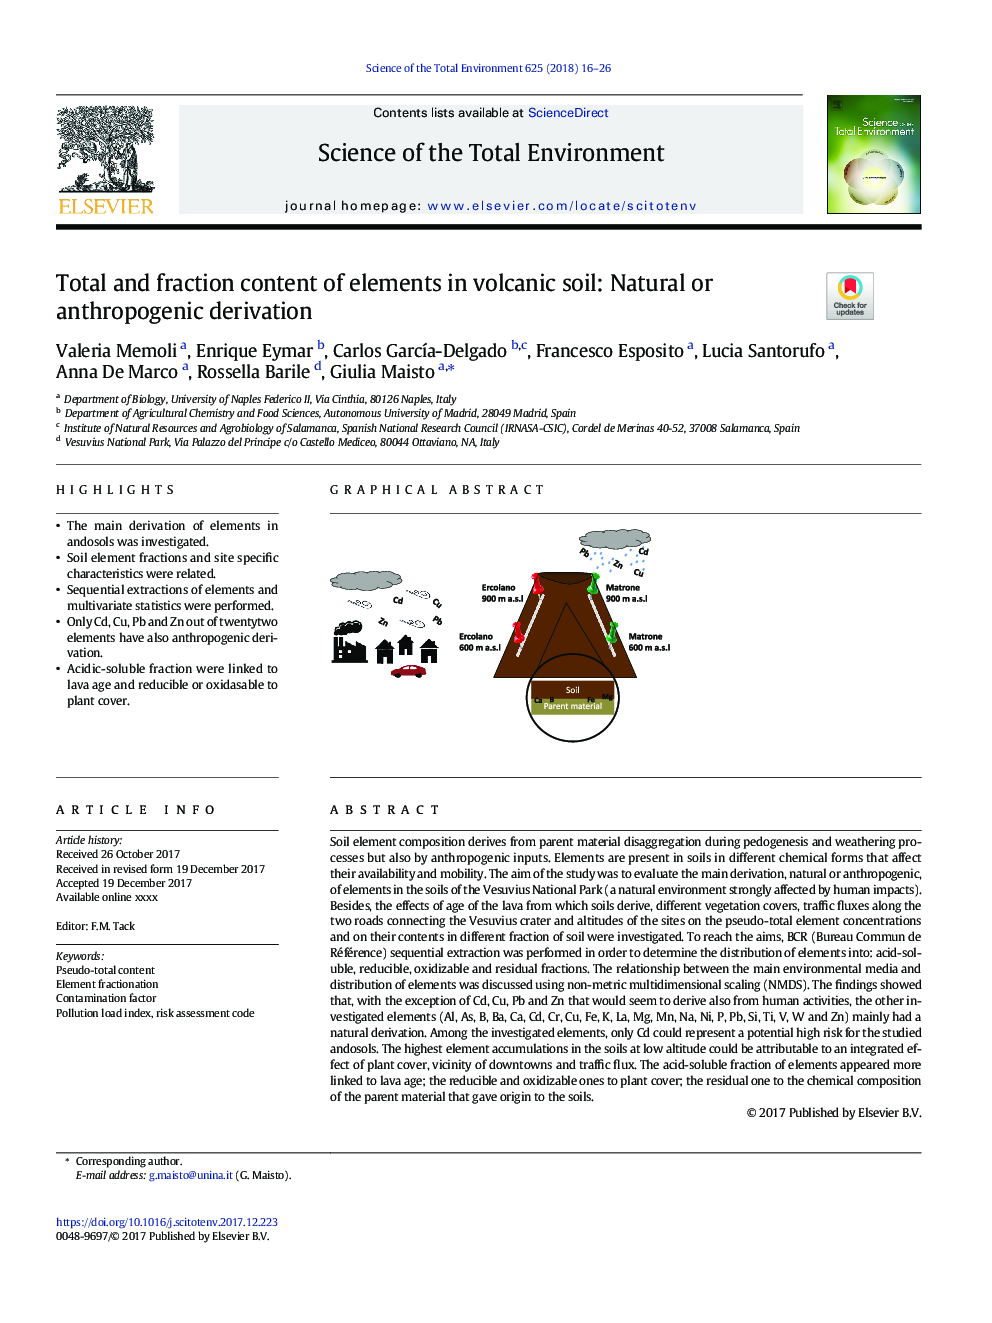 Total and fraction content of elements in volcanic soil: Natural or anthropogenic derivation